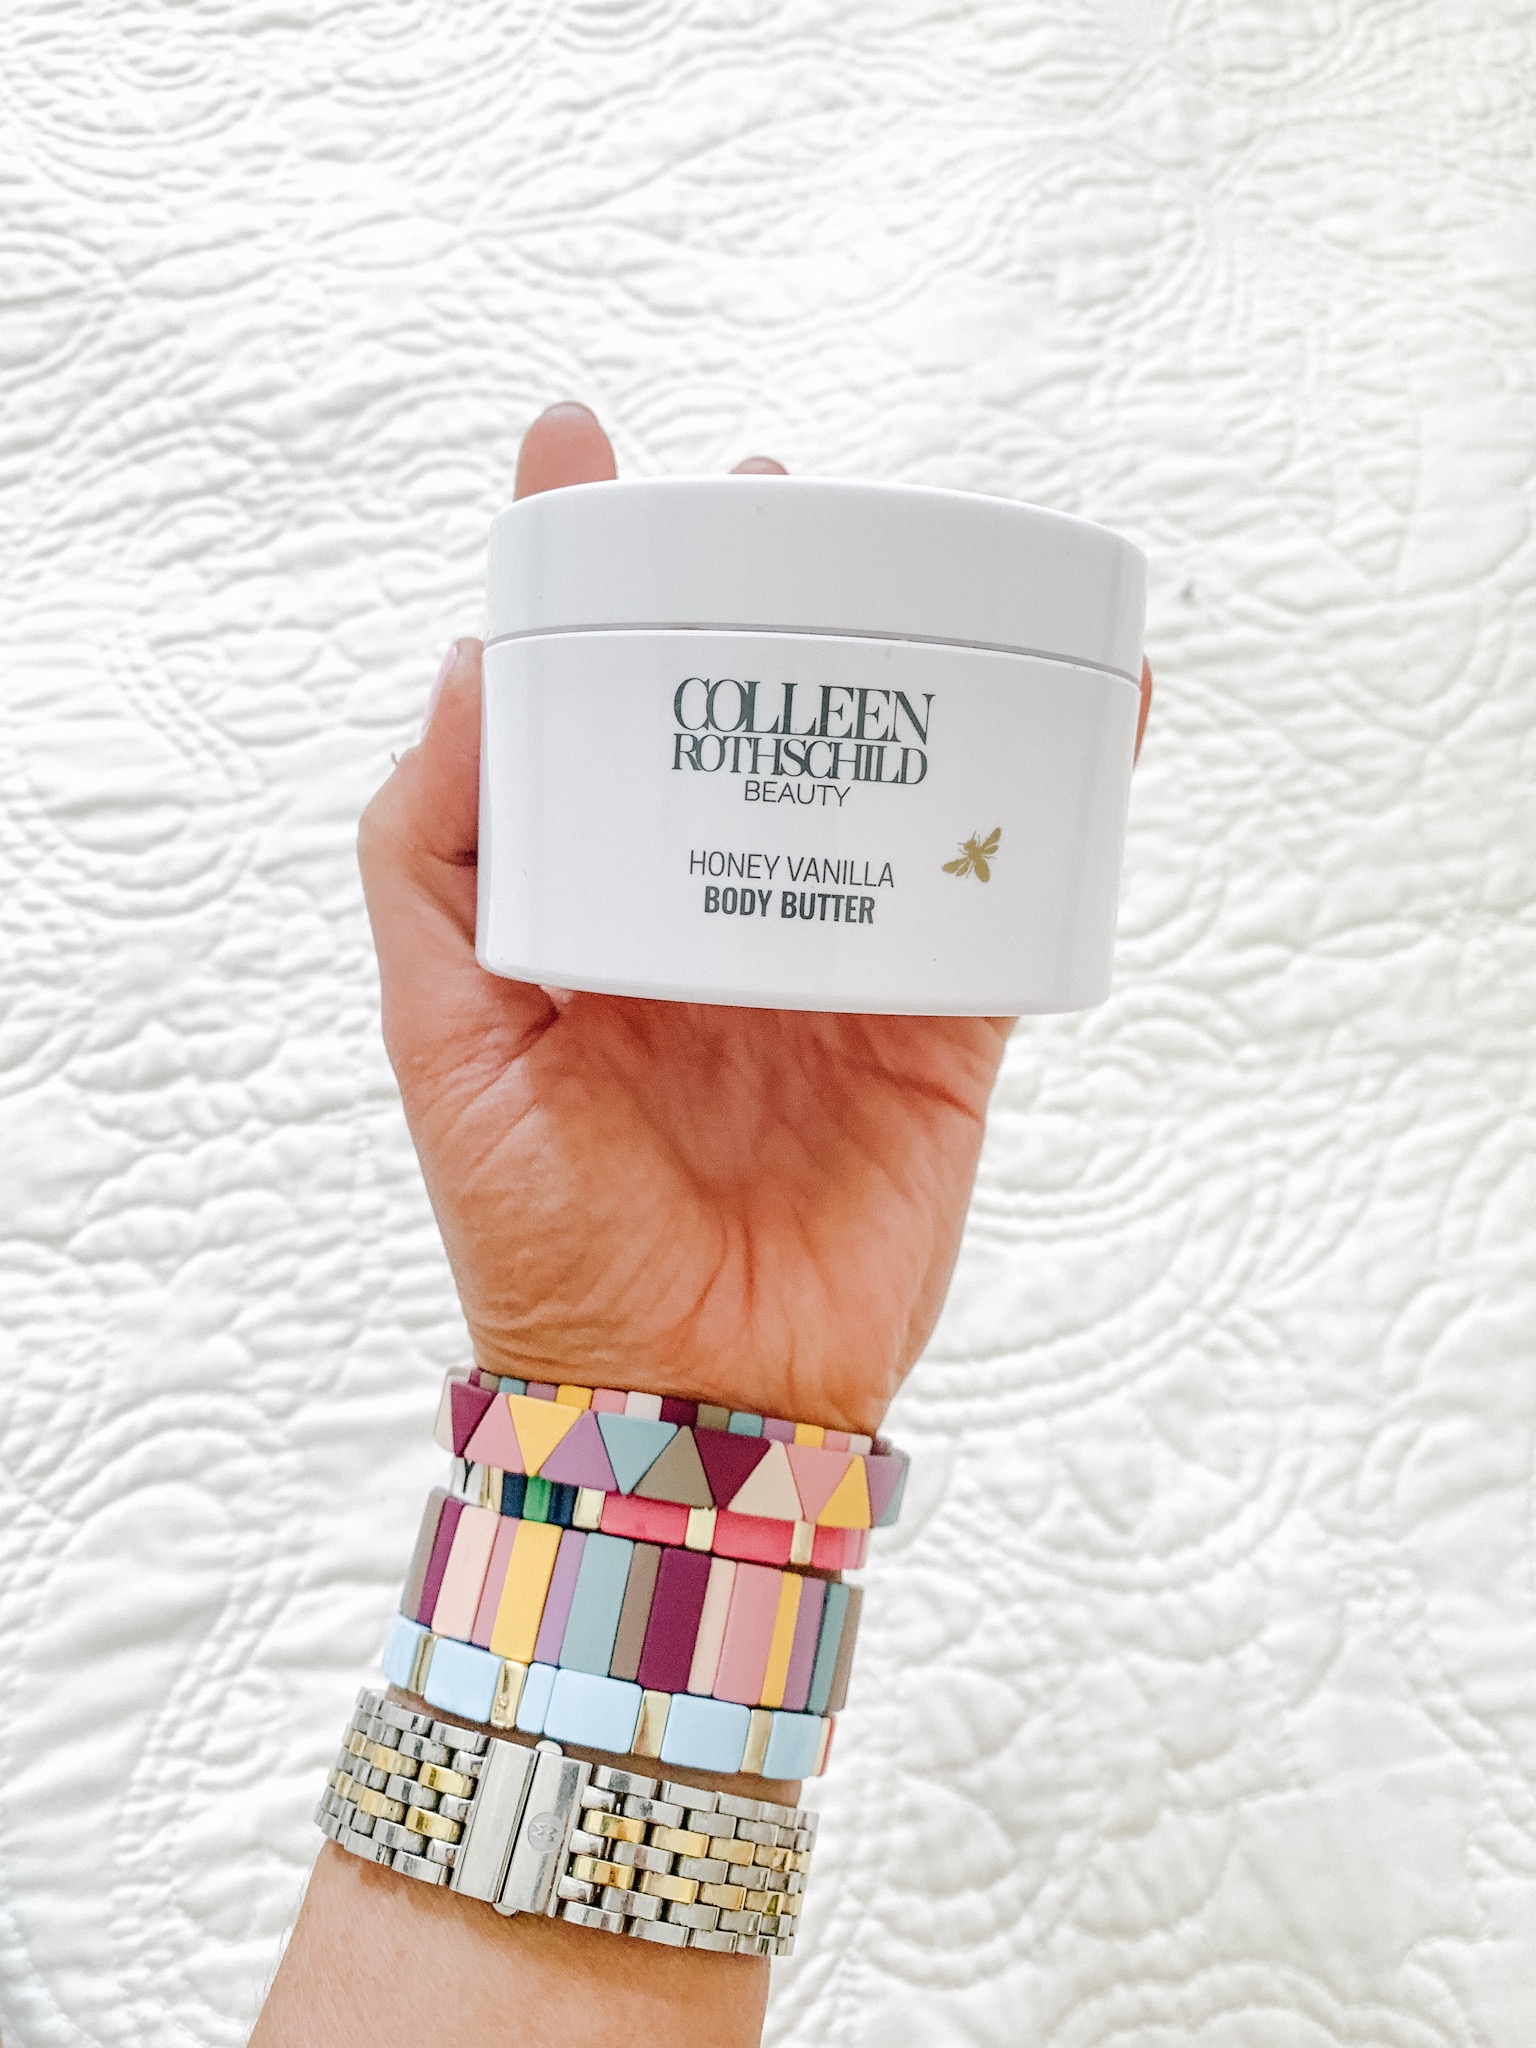 Colleen Rothschild body butter | Style Your Senses